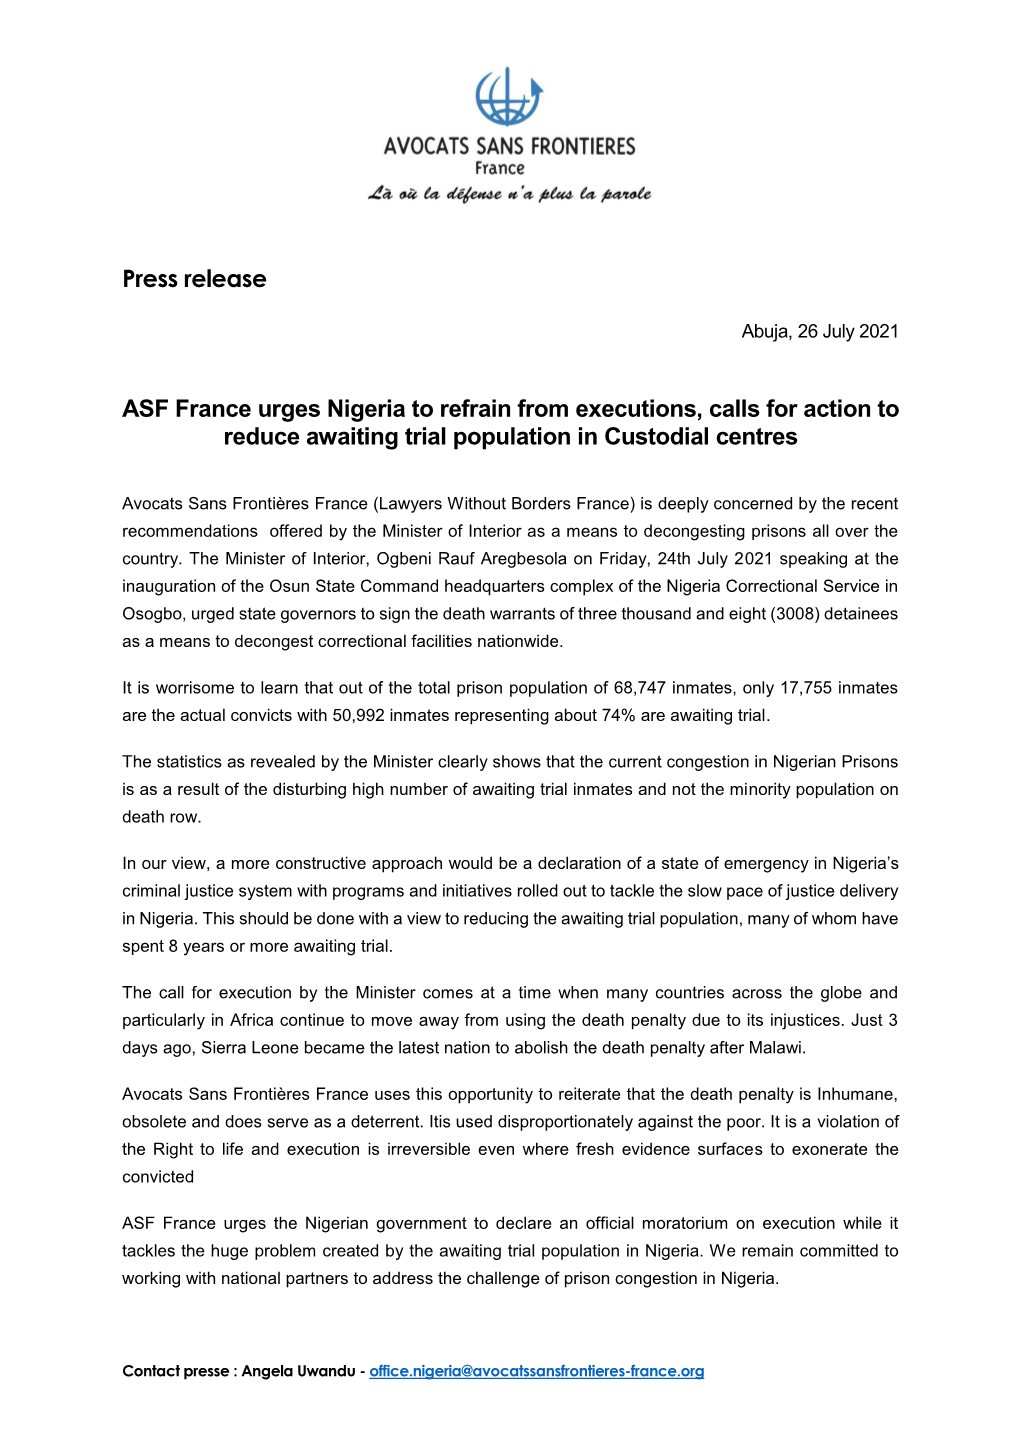 Press Release ASF France Urges Nigeria to Refrain from Executions